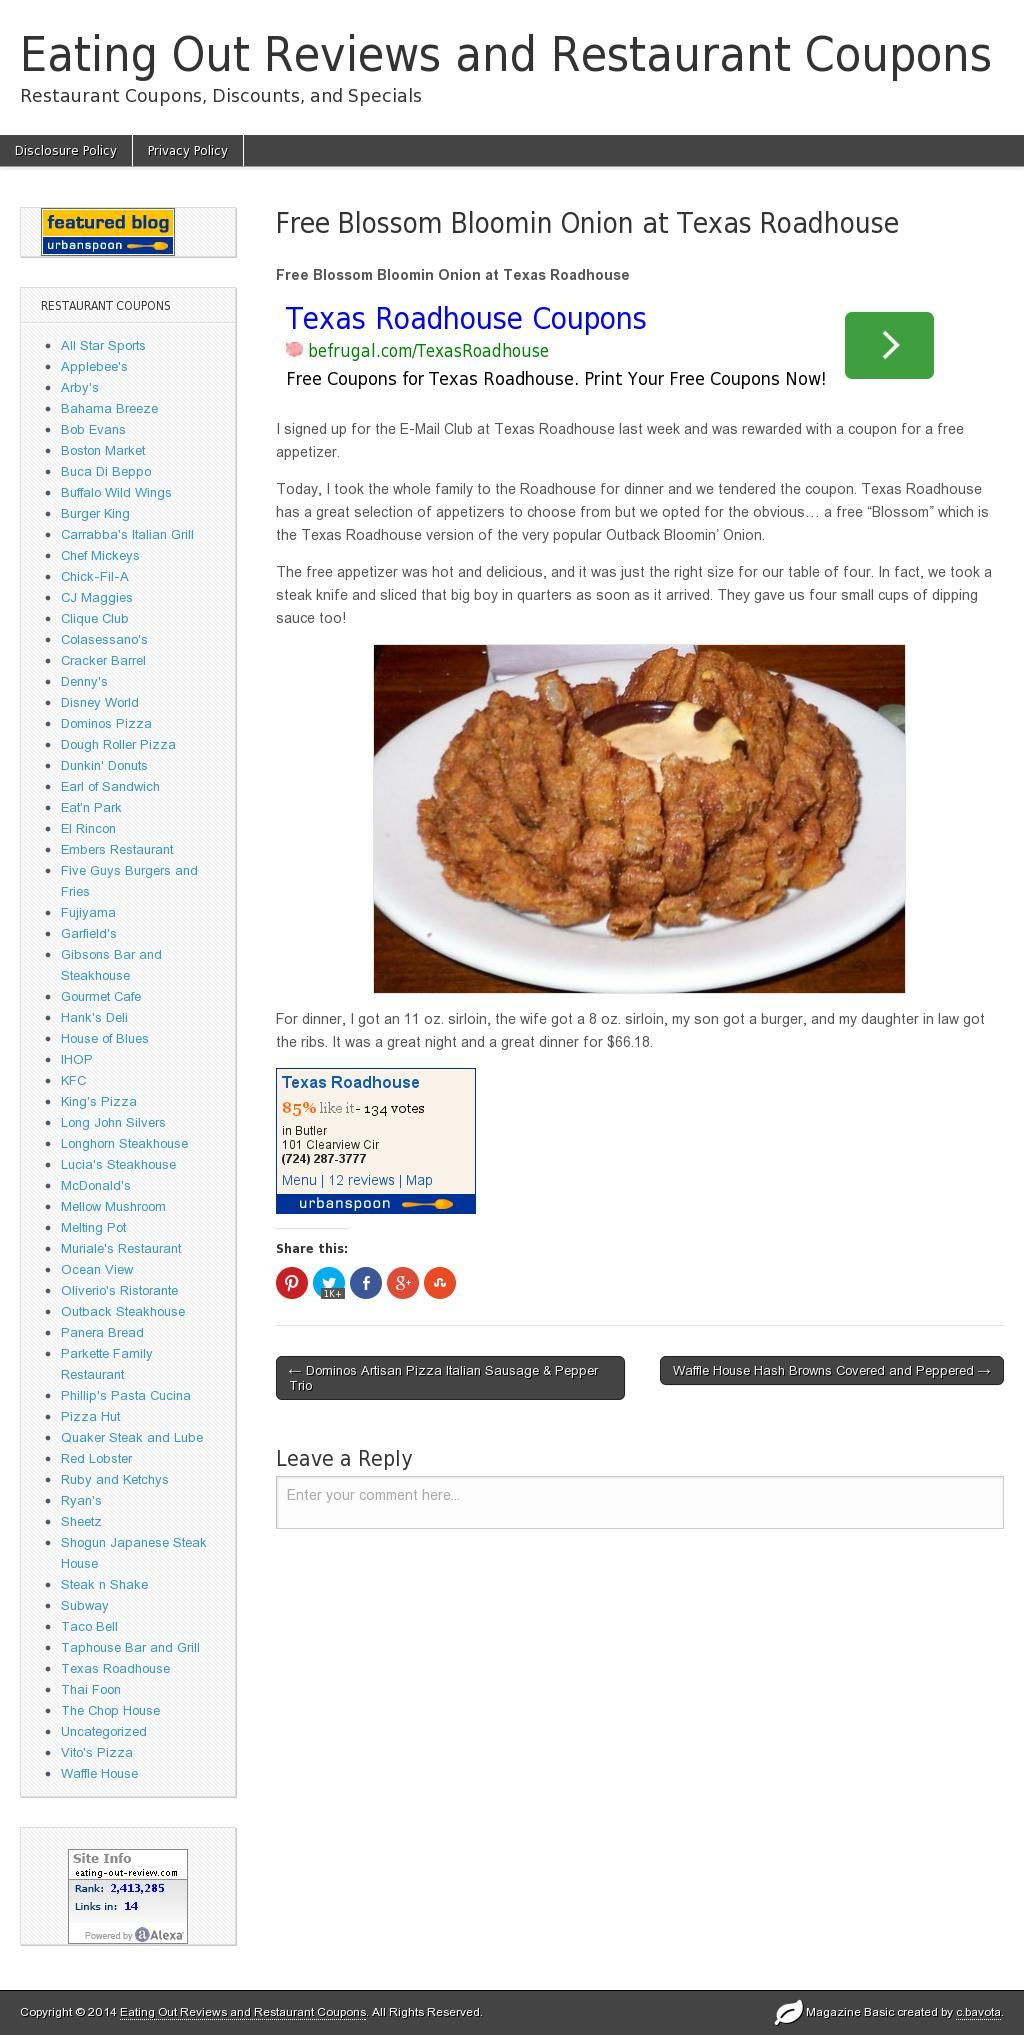 Free Blossom Bloomin Onion At Texas Roadhouse | Texas Roadhouse - Texas Roadhouse Free Appetizer Printable Coupon 2015